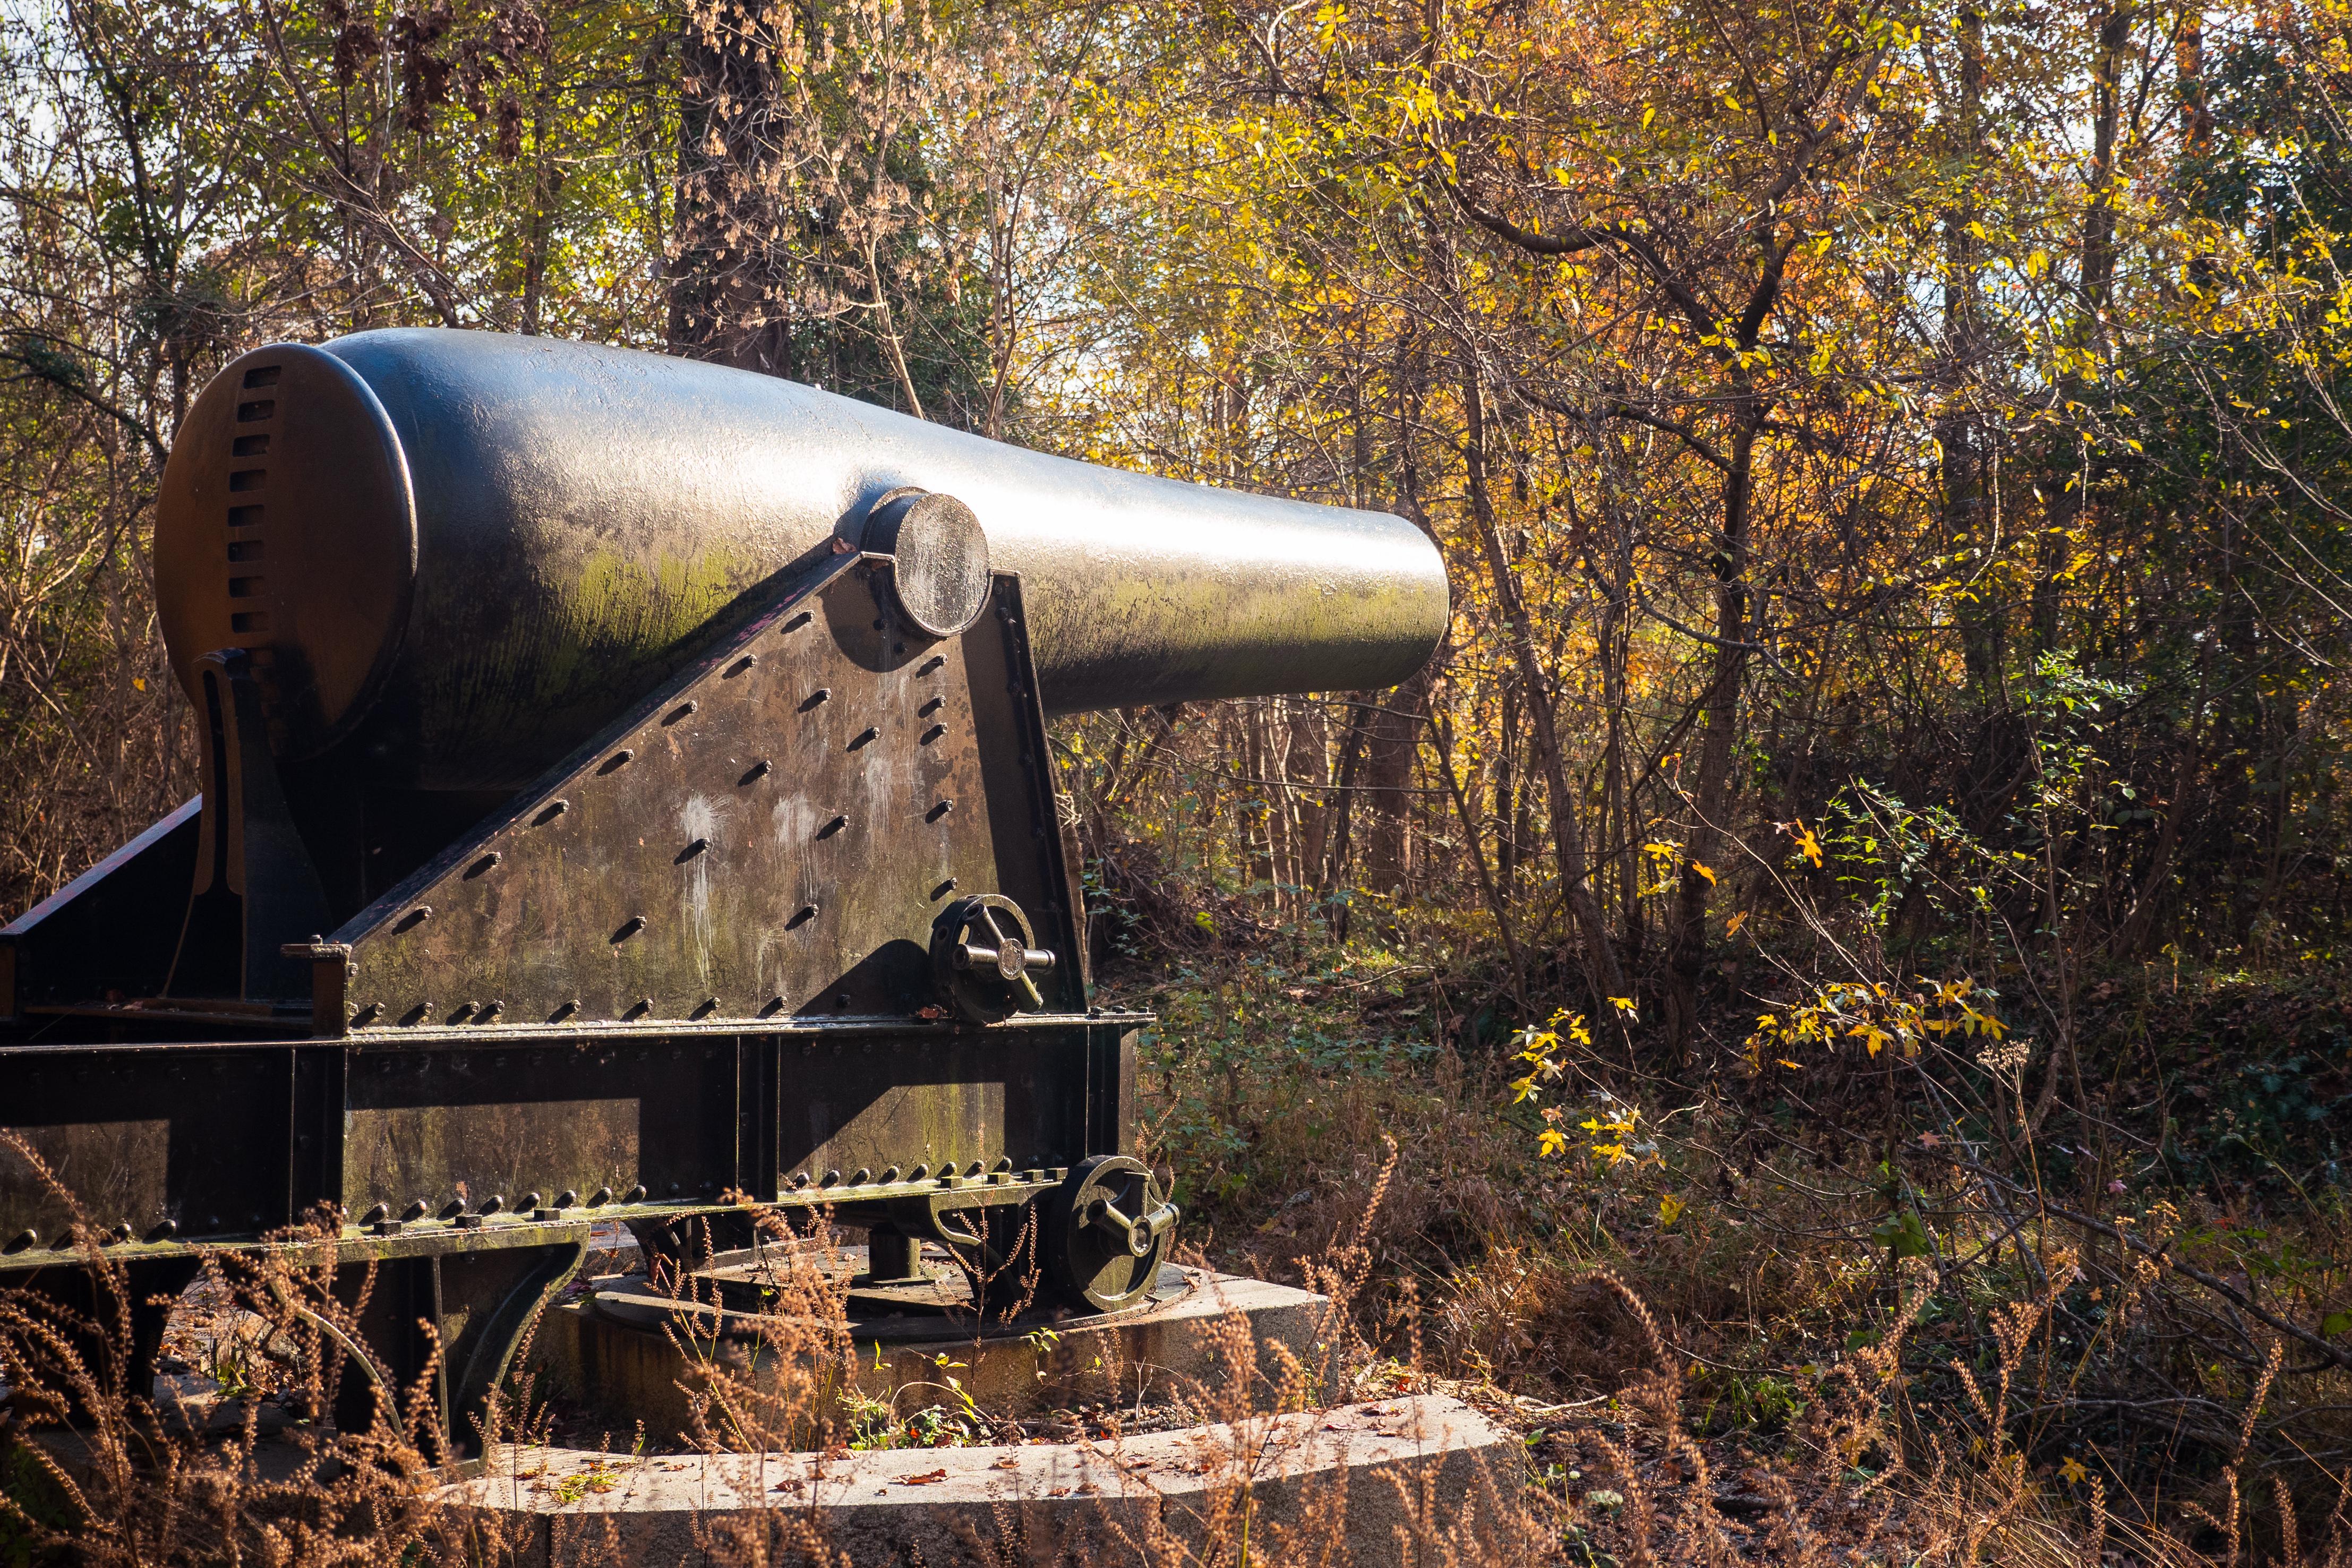 A cannon in front of fall leaves.